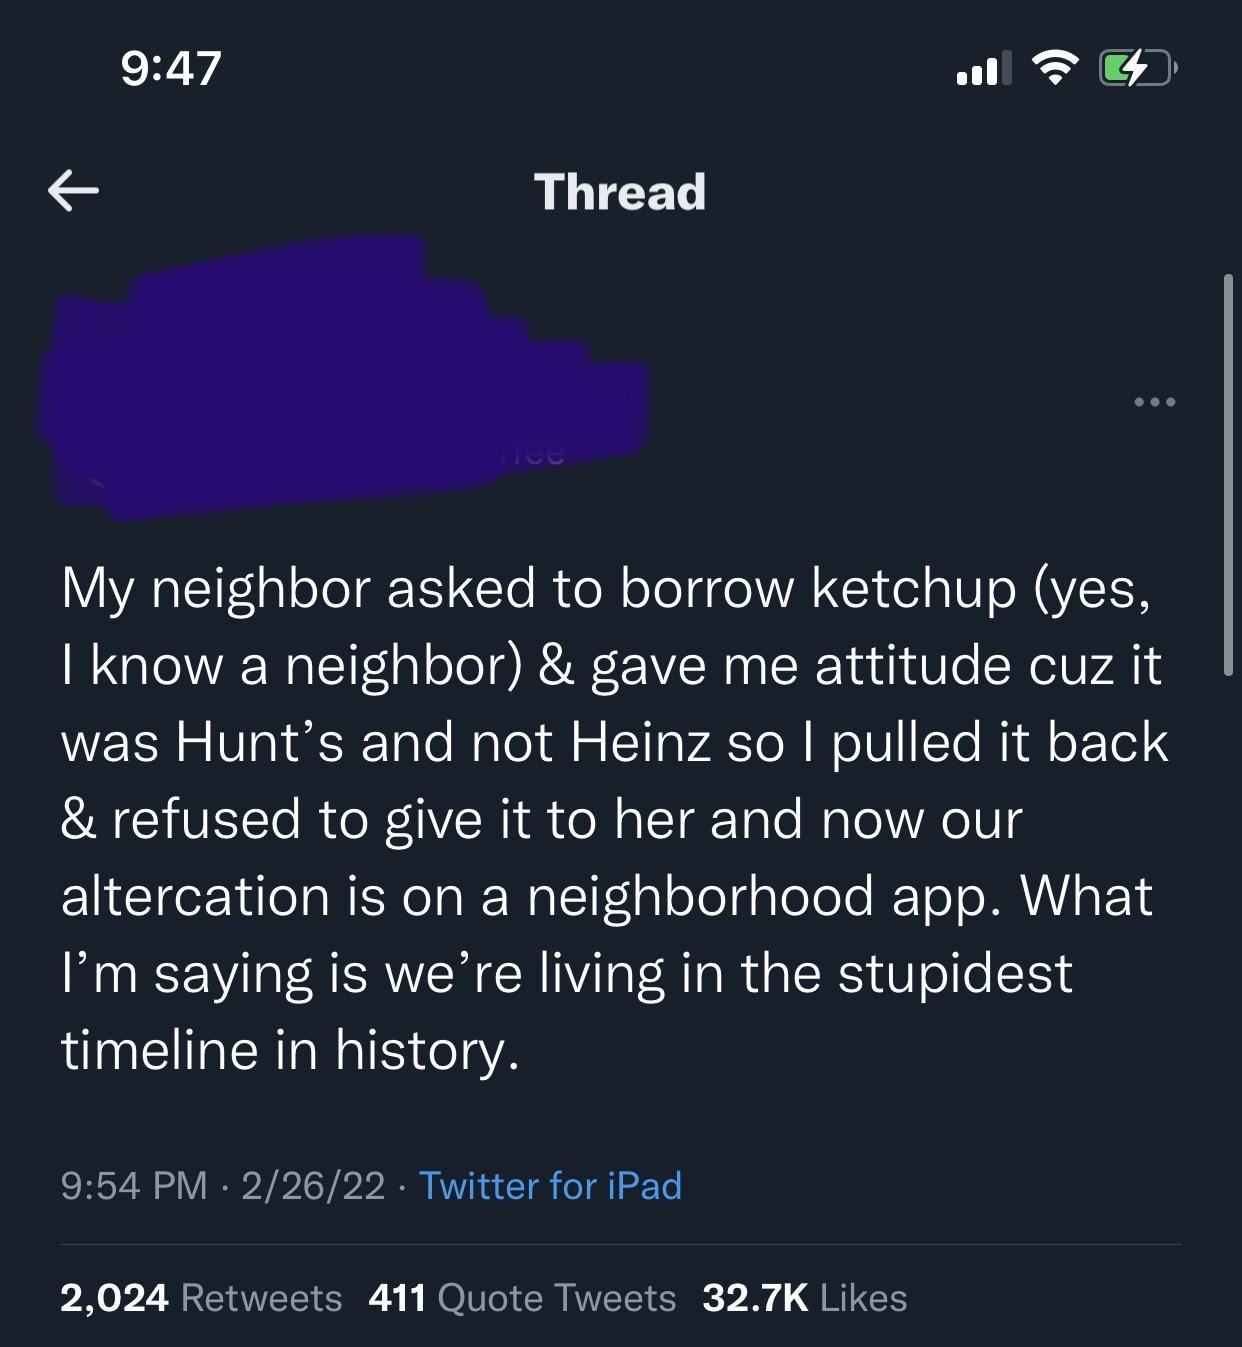 Online Twitter comment, stating, &quot;My neighbor asked to borrow ketchup (yes, I know a neighbor) &amp; gave me attitude cuz it was Hunt&#x27;s and not Heinz so I pulled it back &amp; refused to give it to her and now our altercation is on the neighborhood app.&quot;